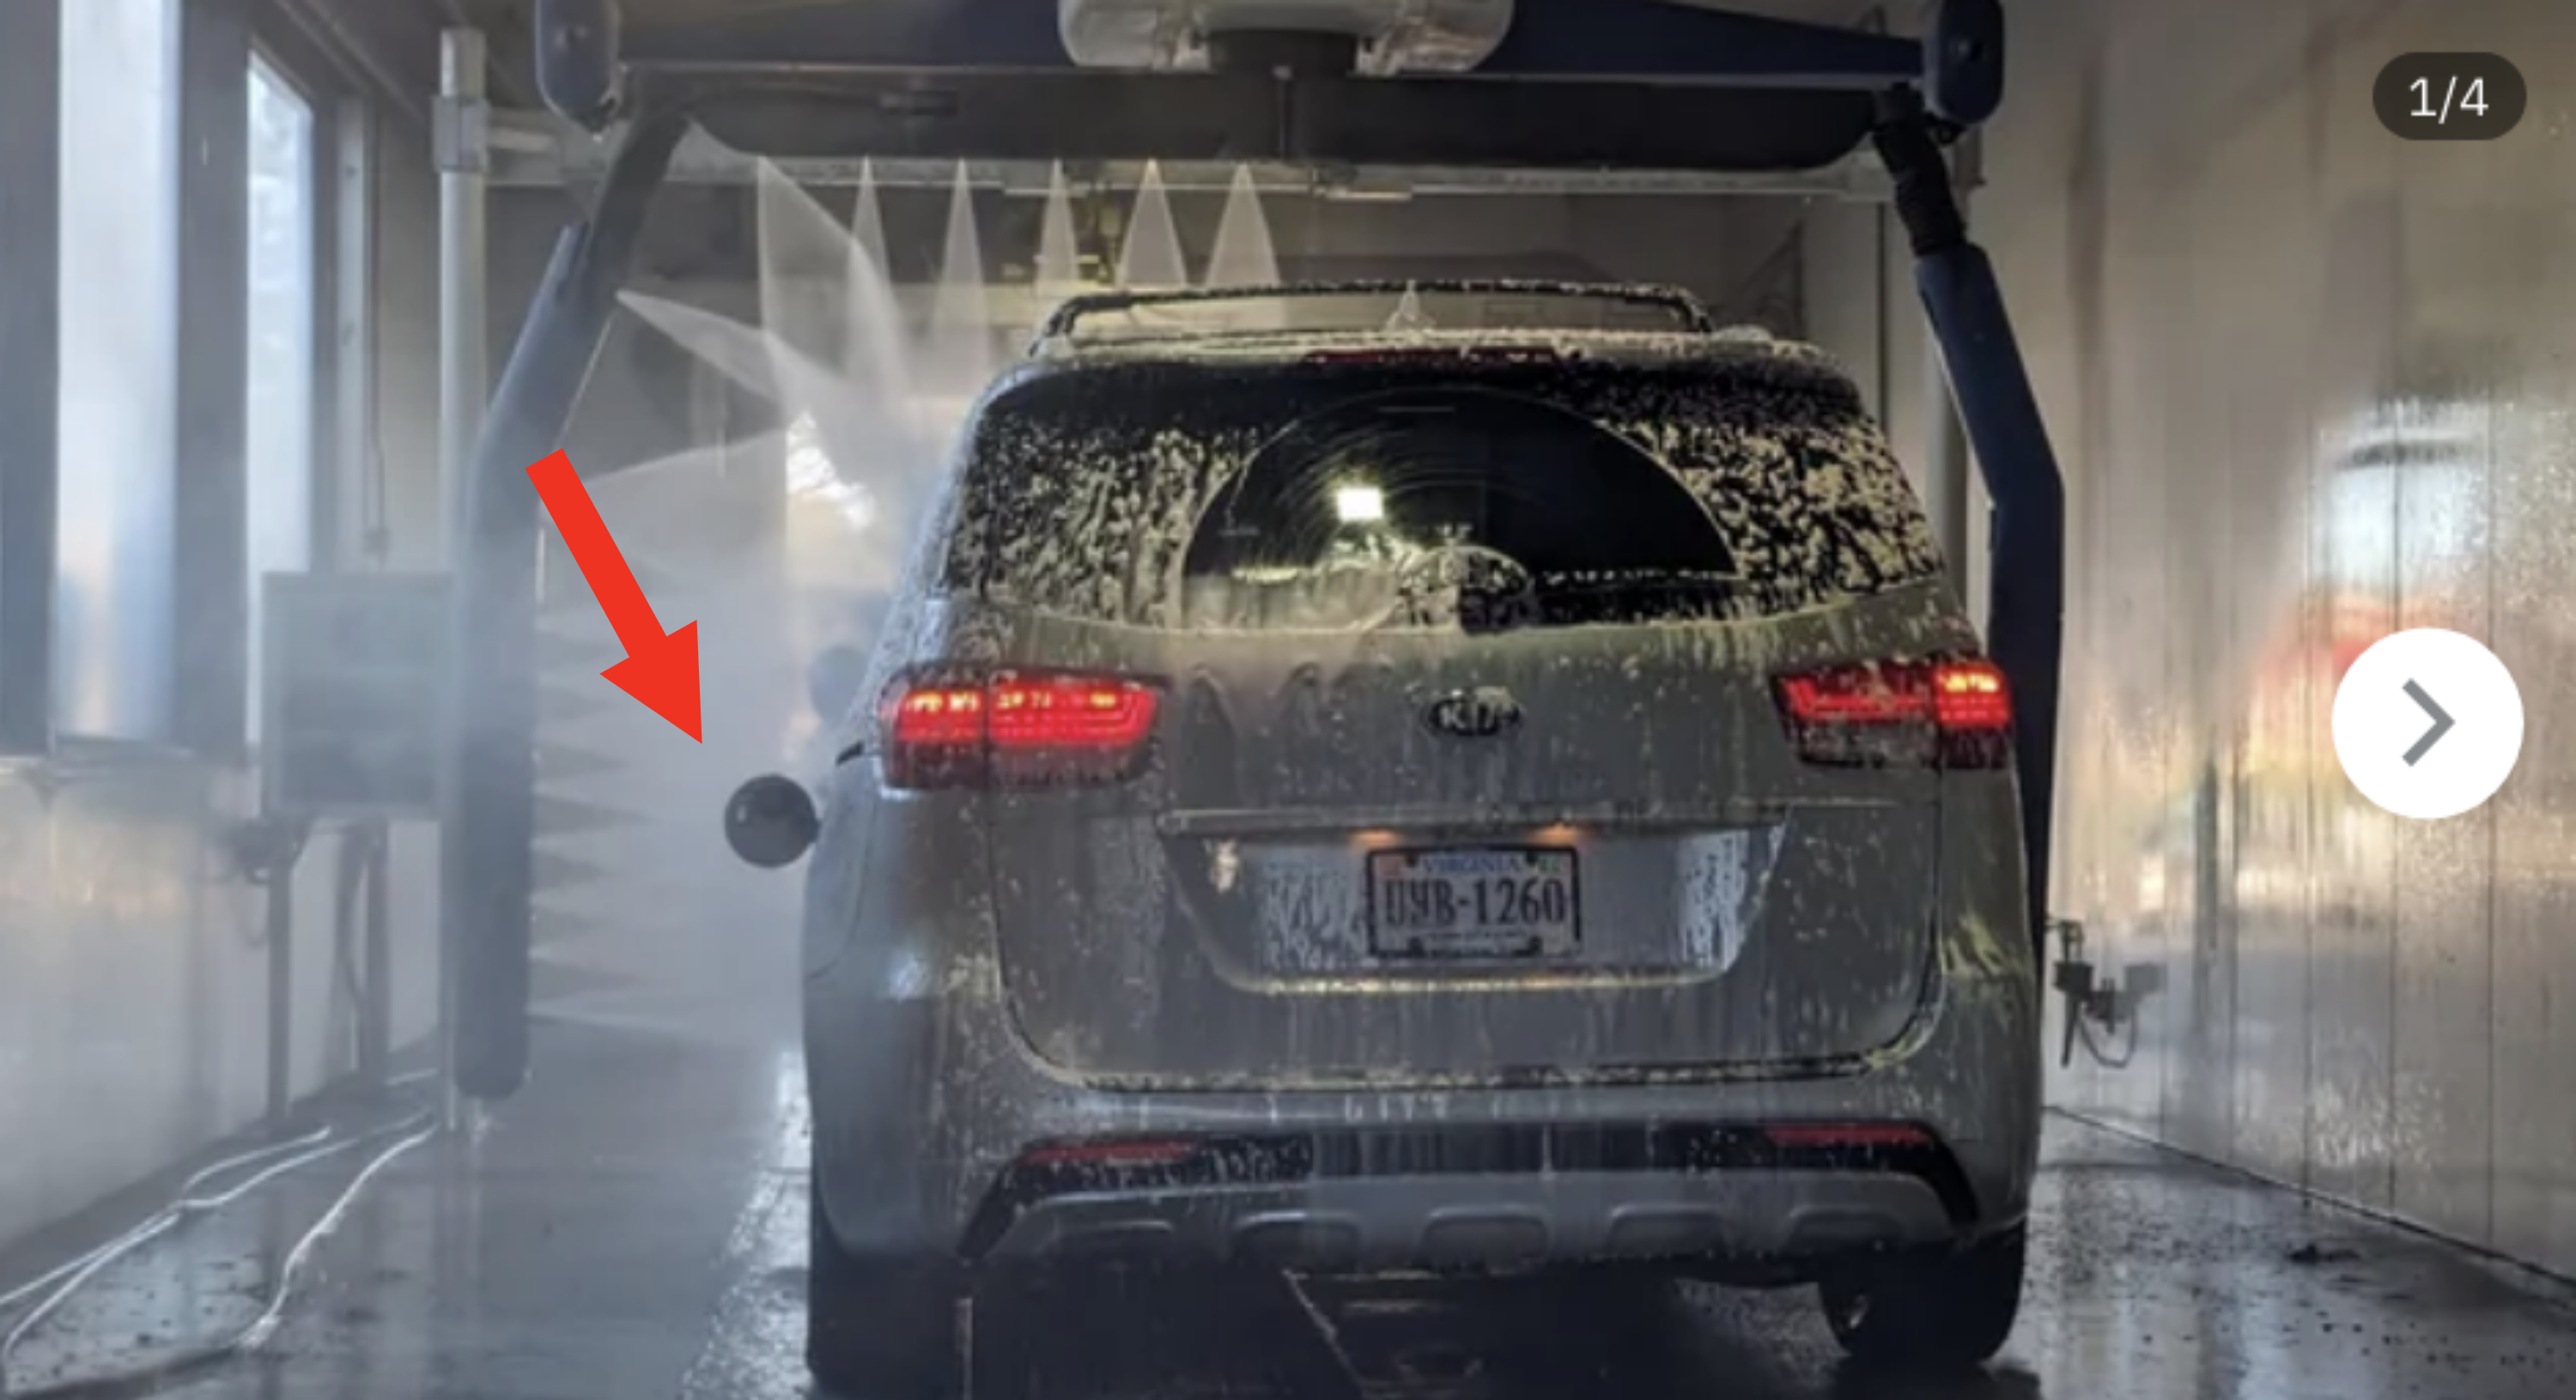 Car going through an automated car wash with water spraying on it